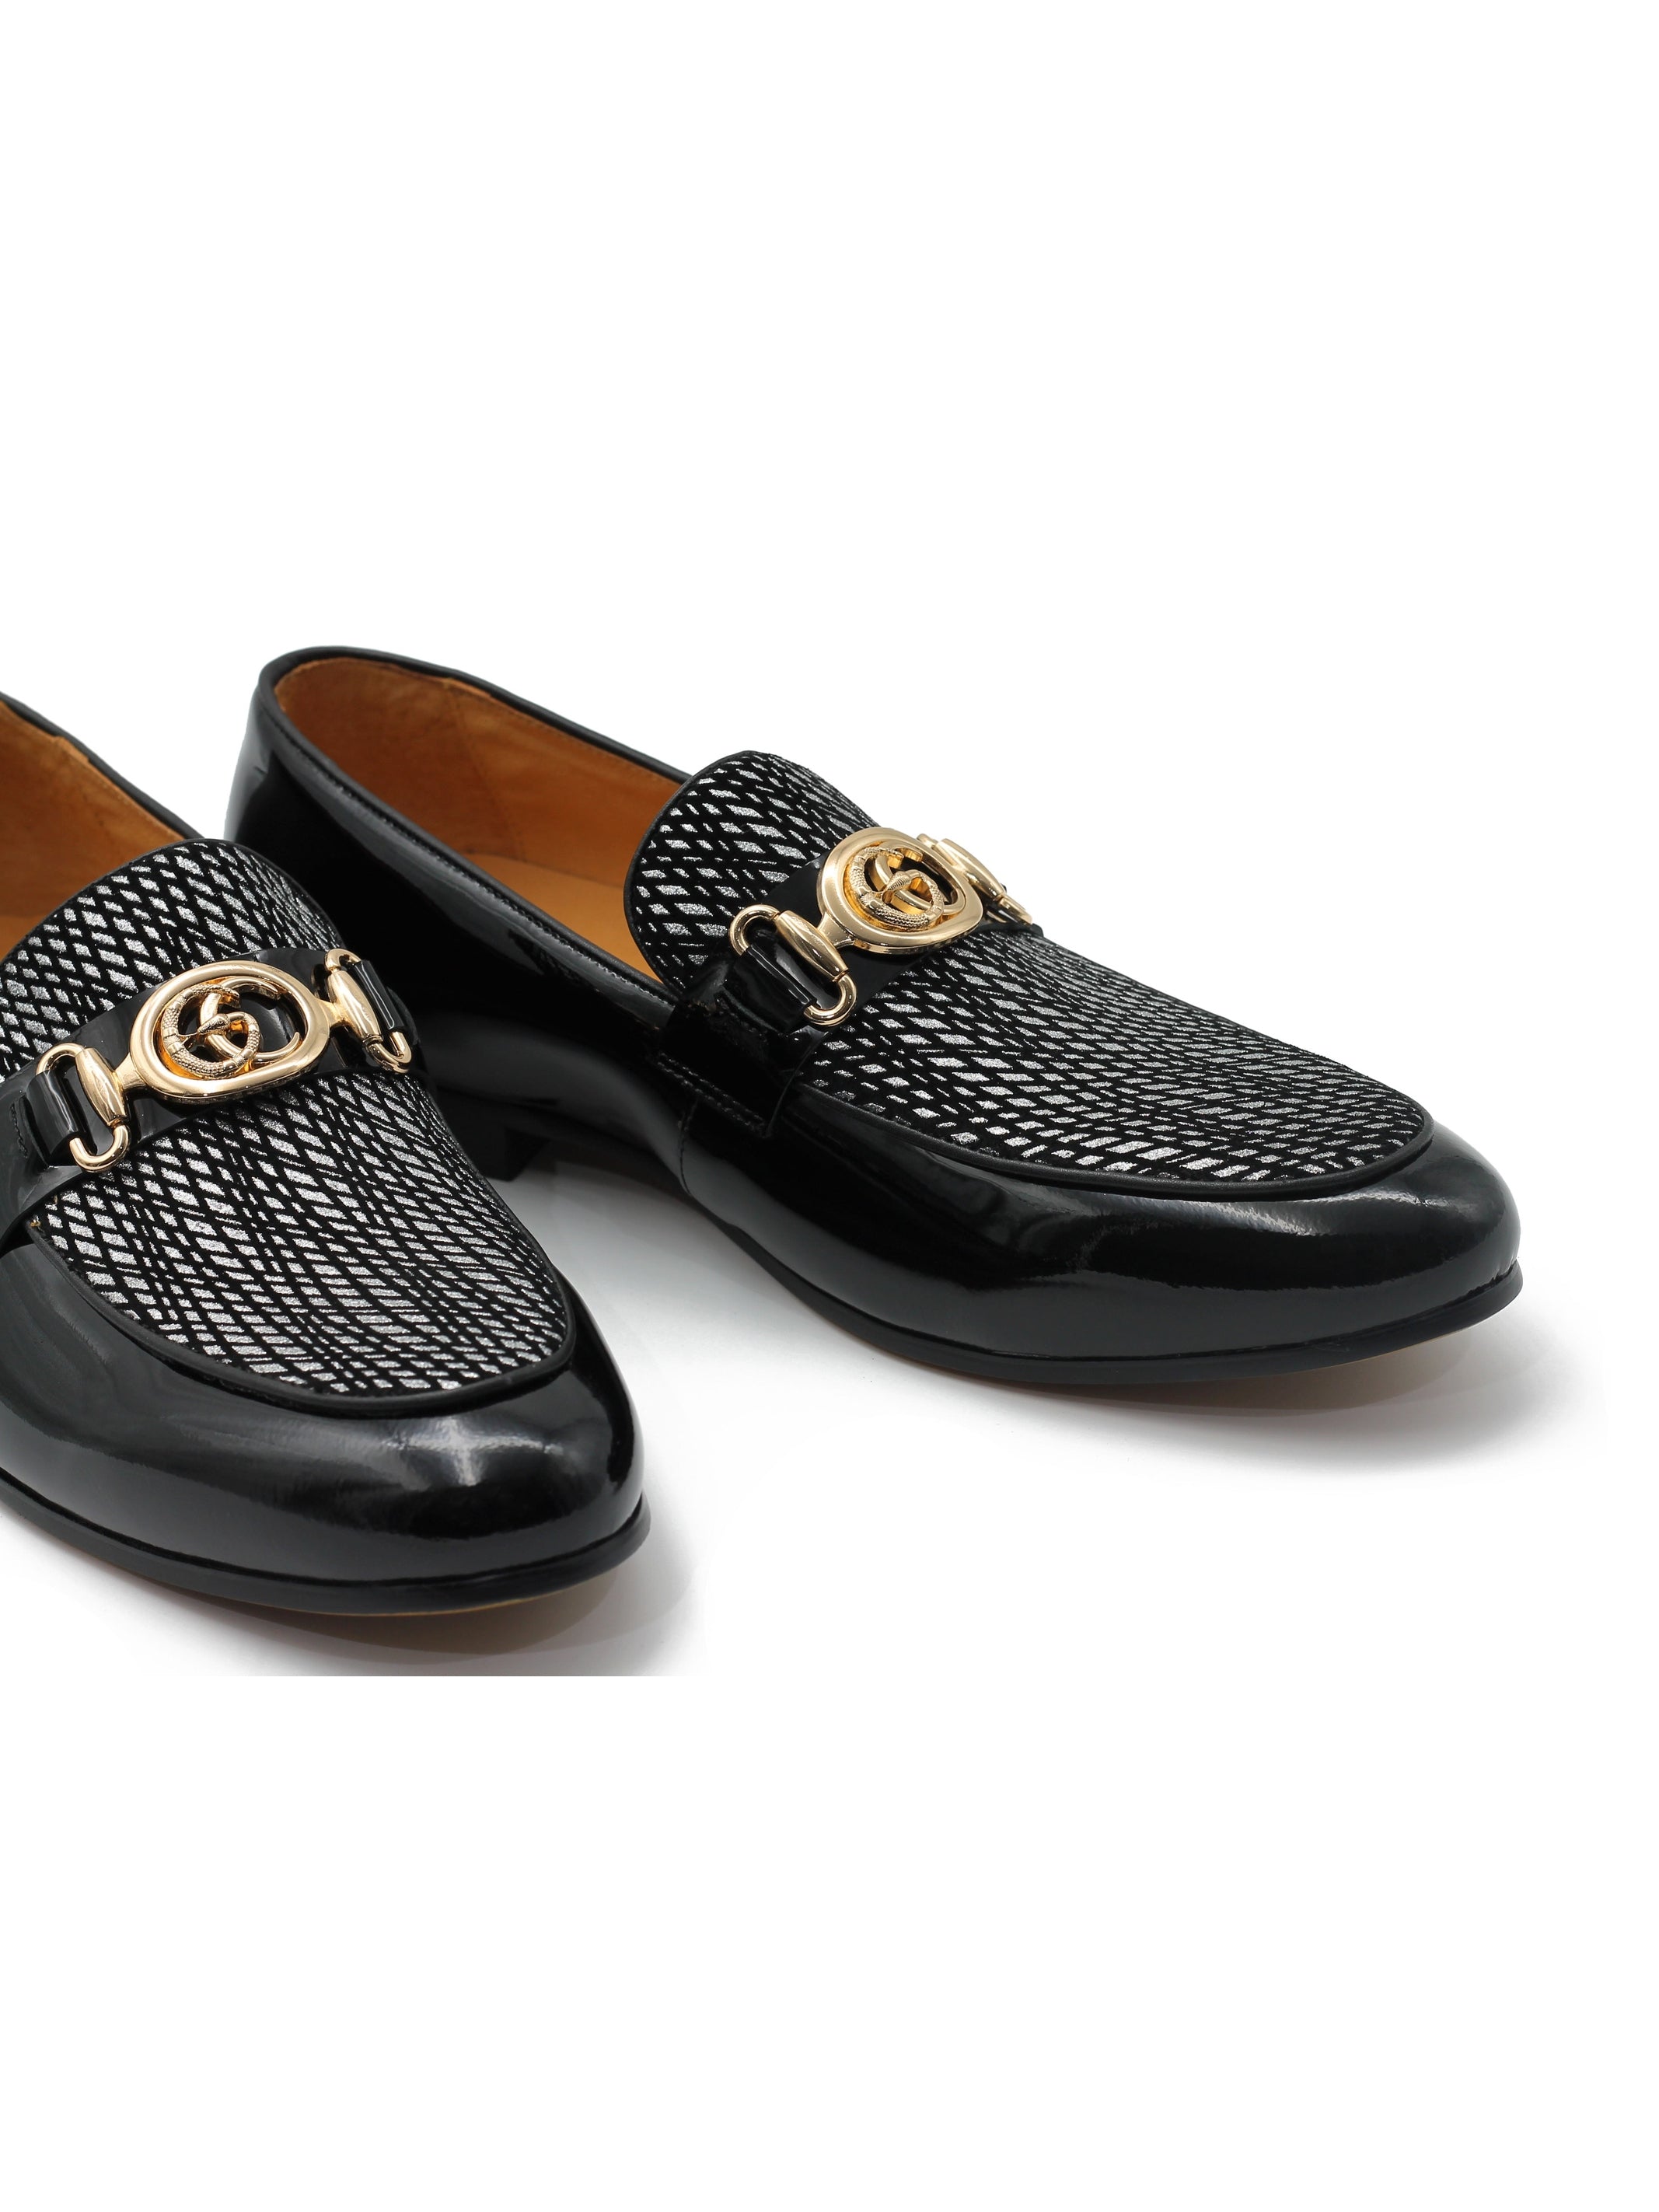 BLACK PATENT LEATHER LOAFERS SILVER GLITTER